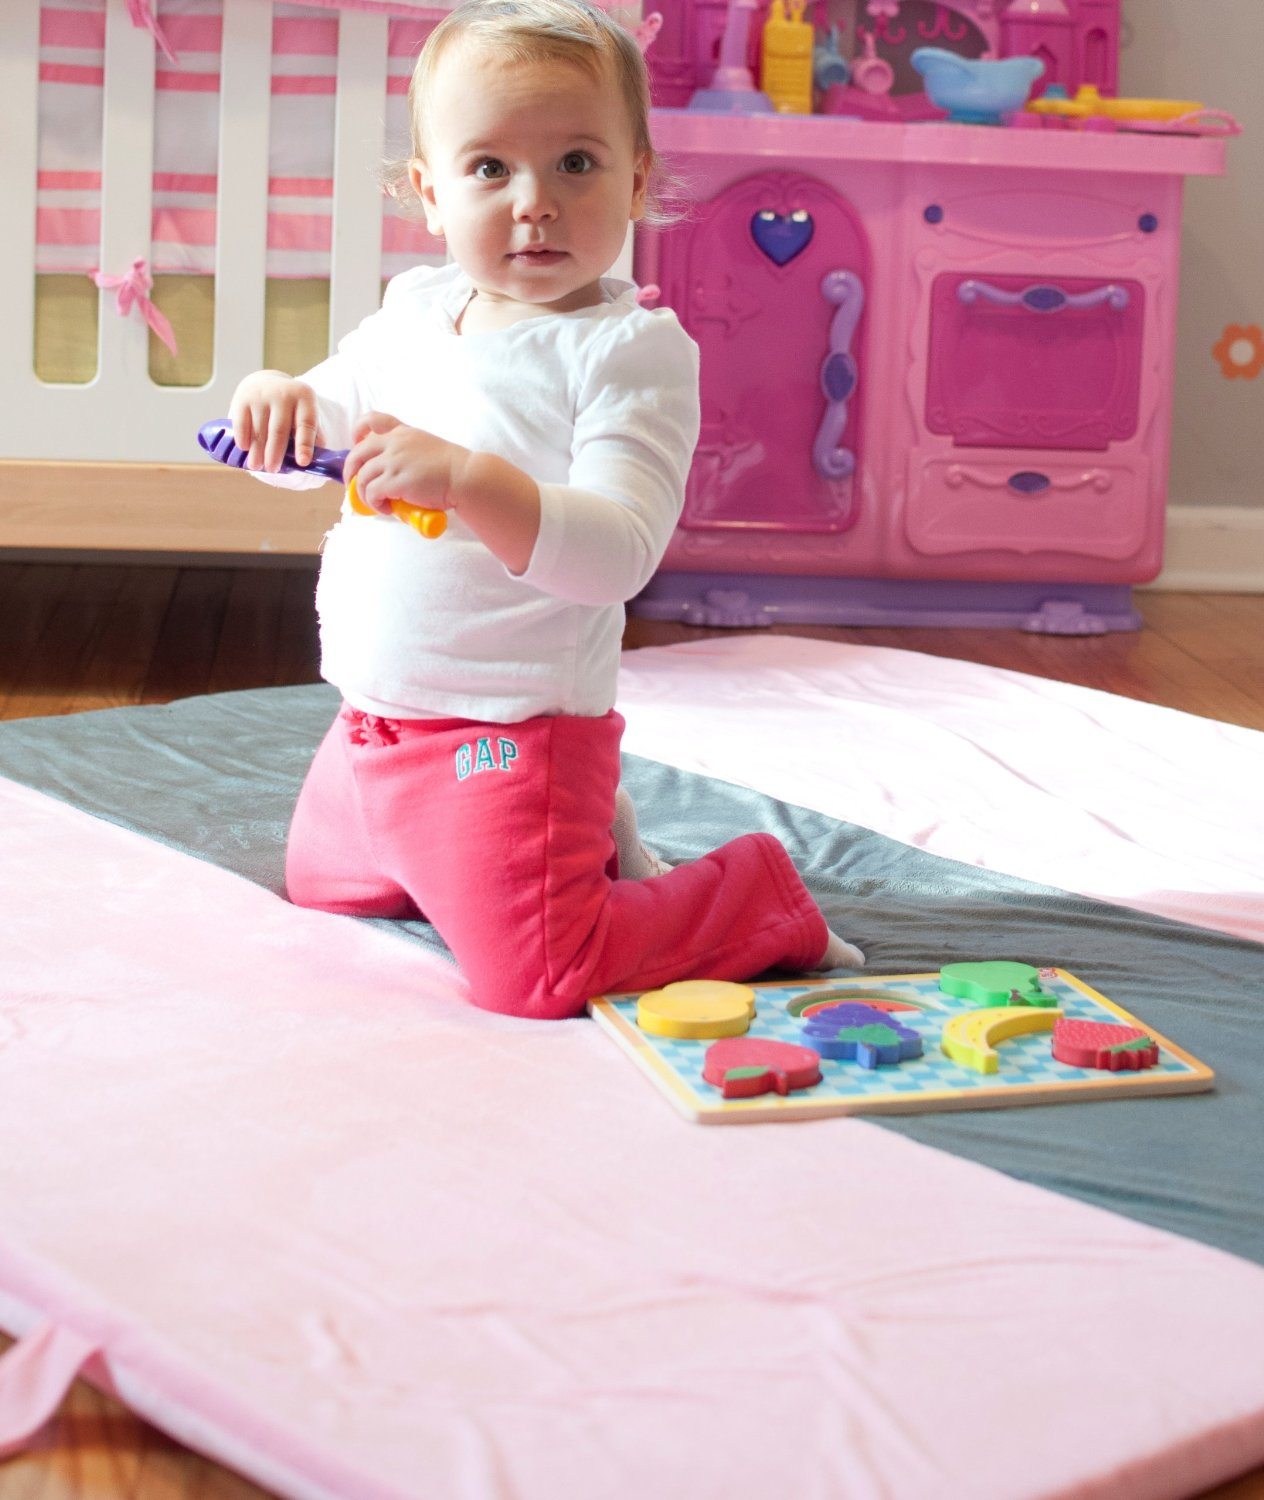 Baby Mushroom: Snug Square Play Mat for Babies and Kids